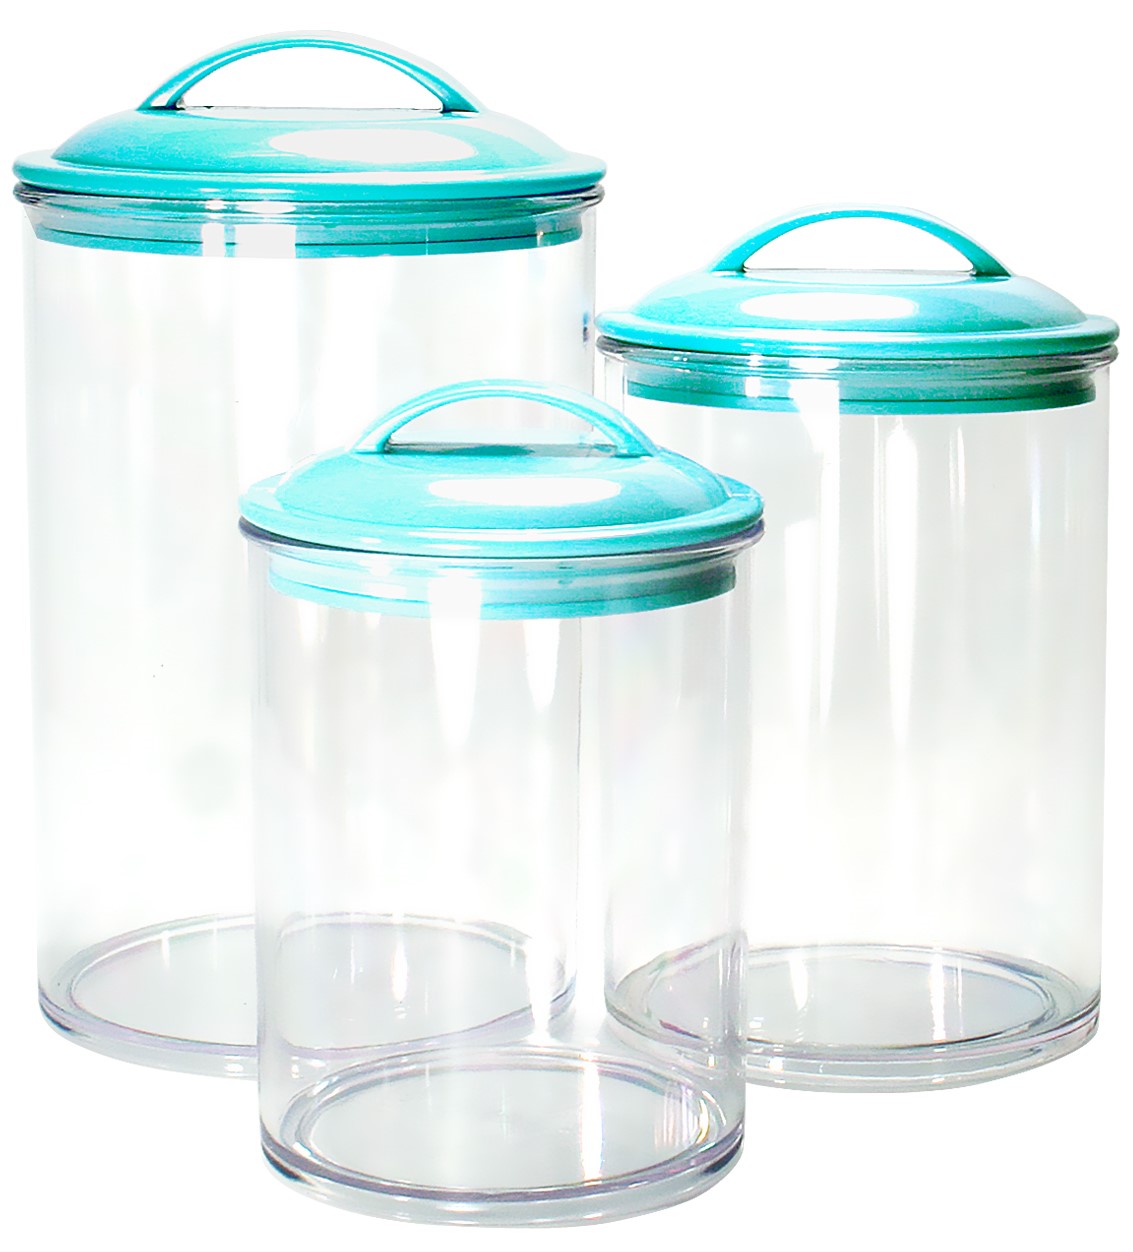 11172 Turquoise Acrylic Canister - Set Of 3